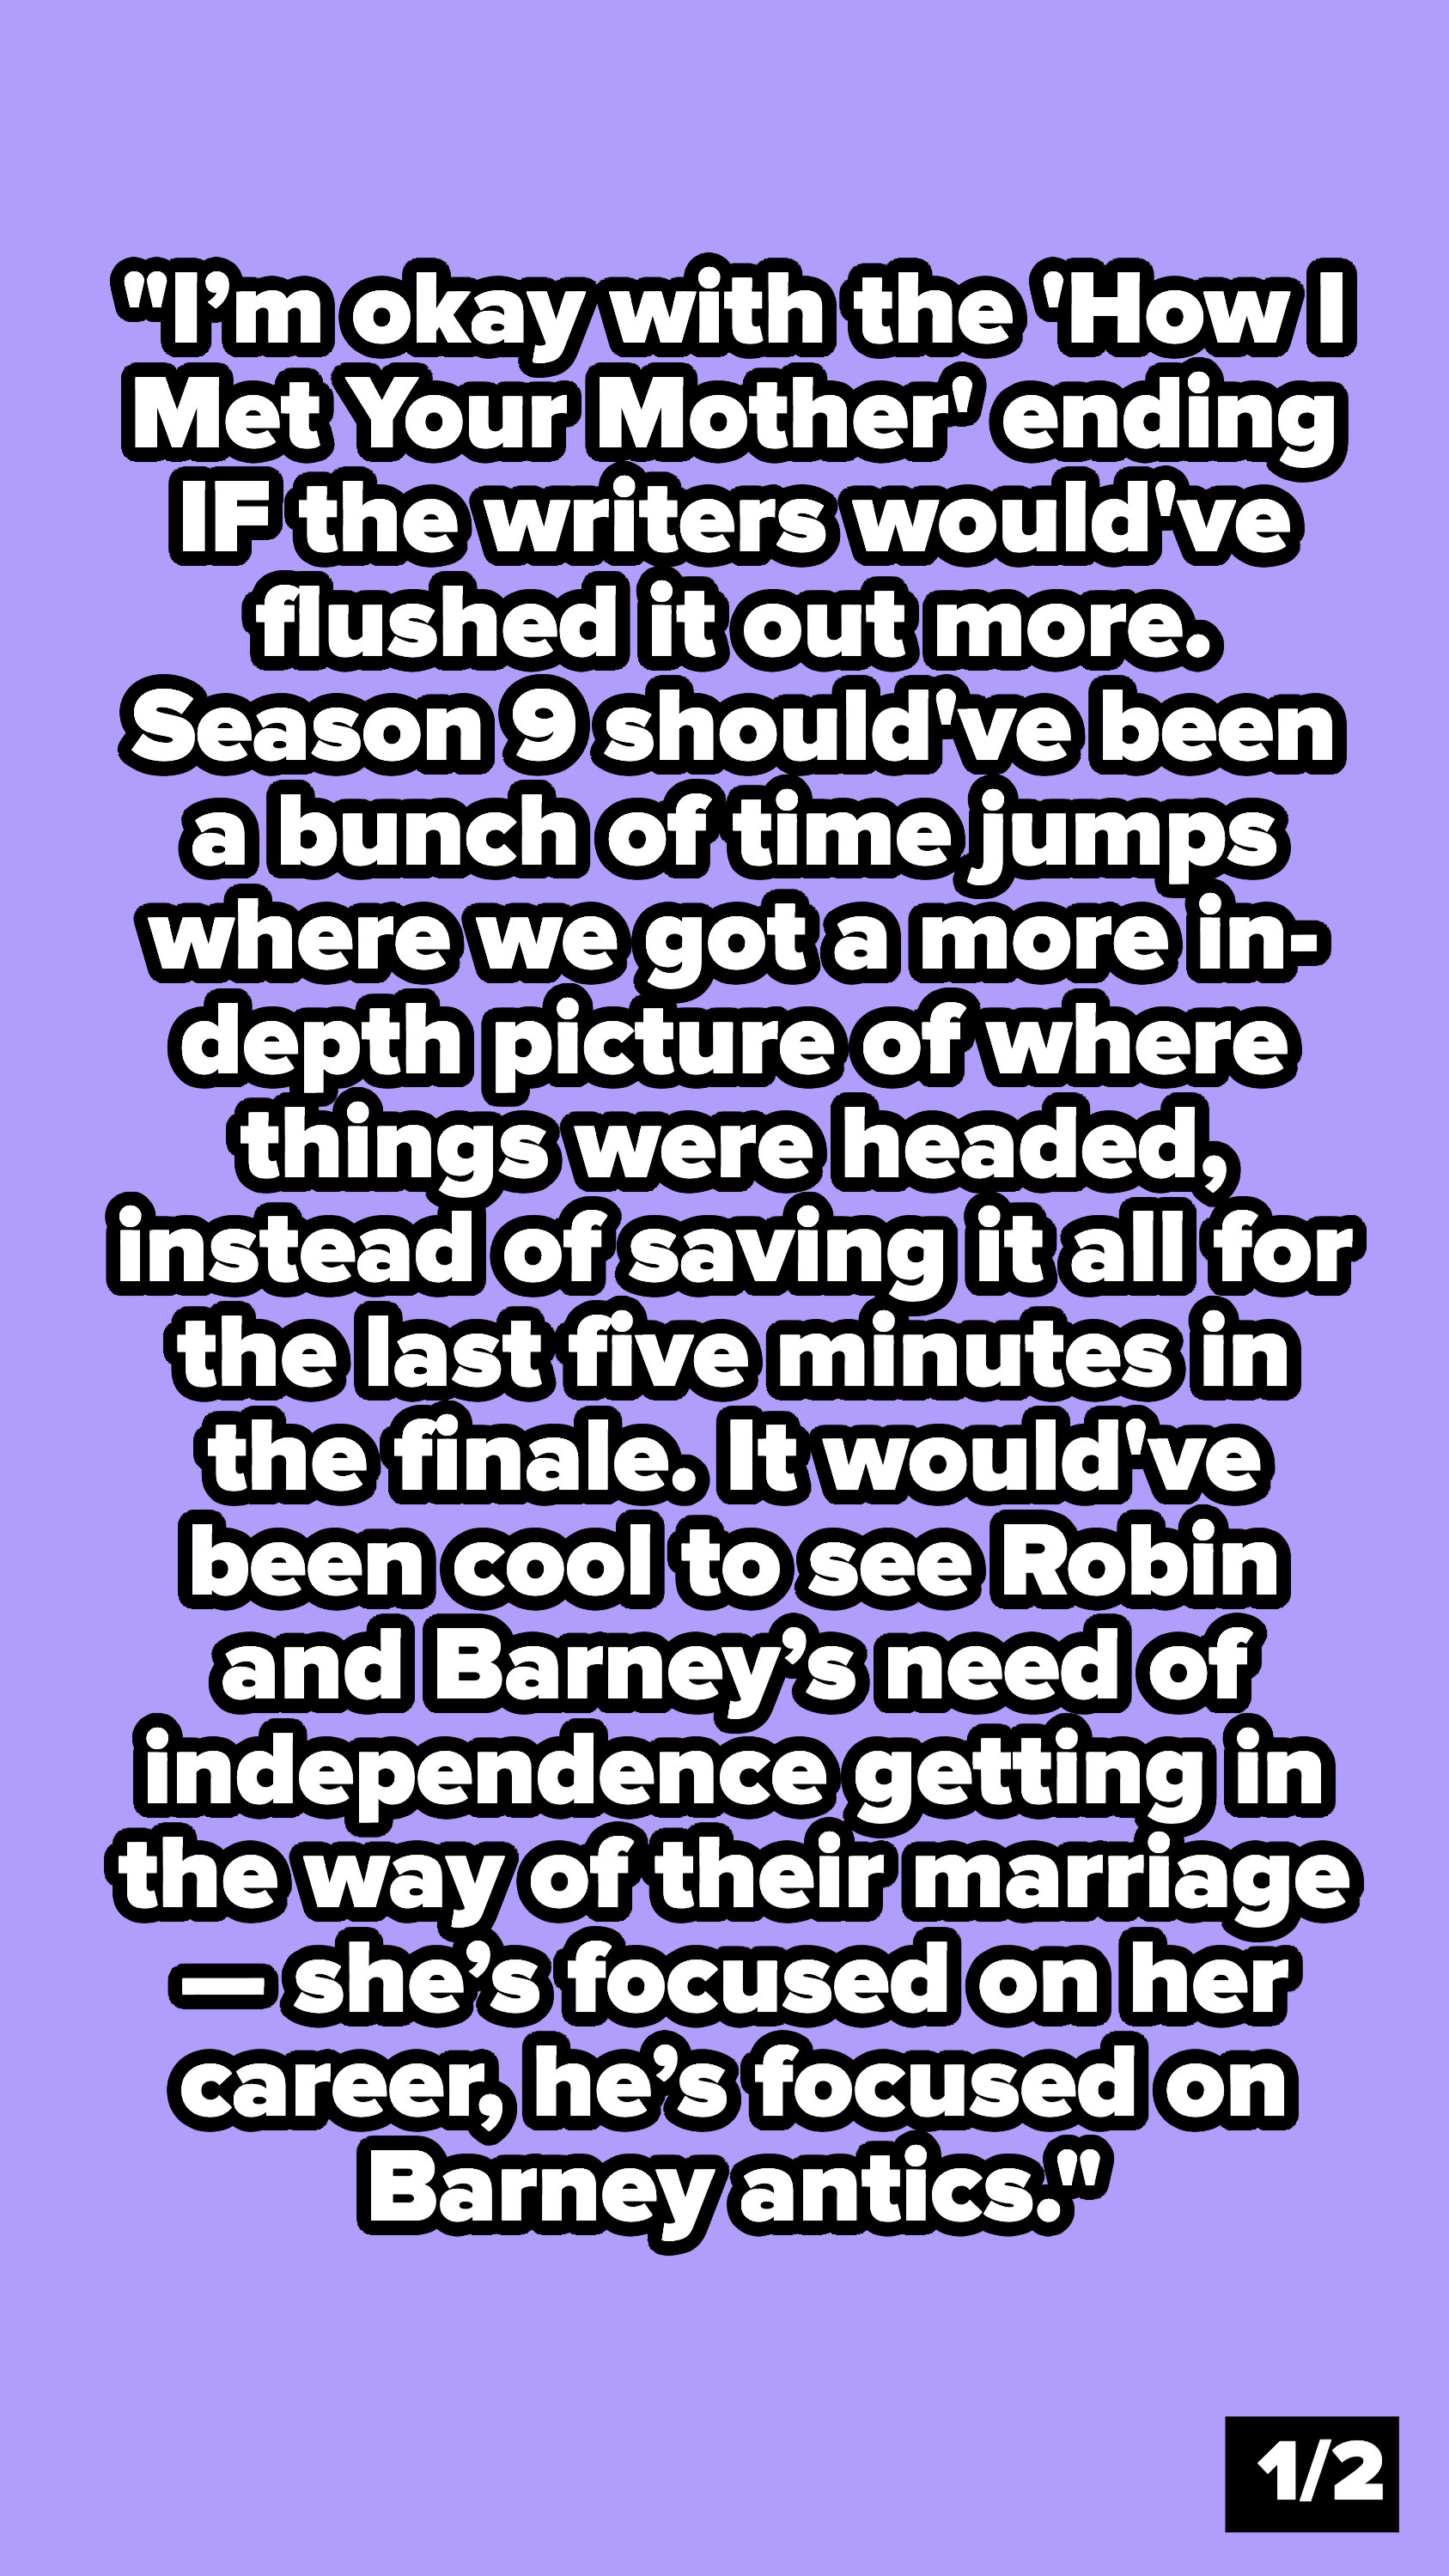 &quot;It would&#x27;ve been cool to see Robin and Barney&#x27;s need of independence getting in the way of their marriage.&quot;